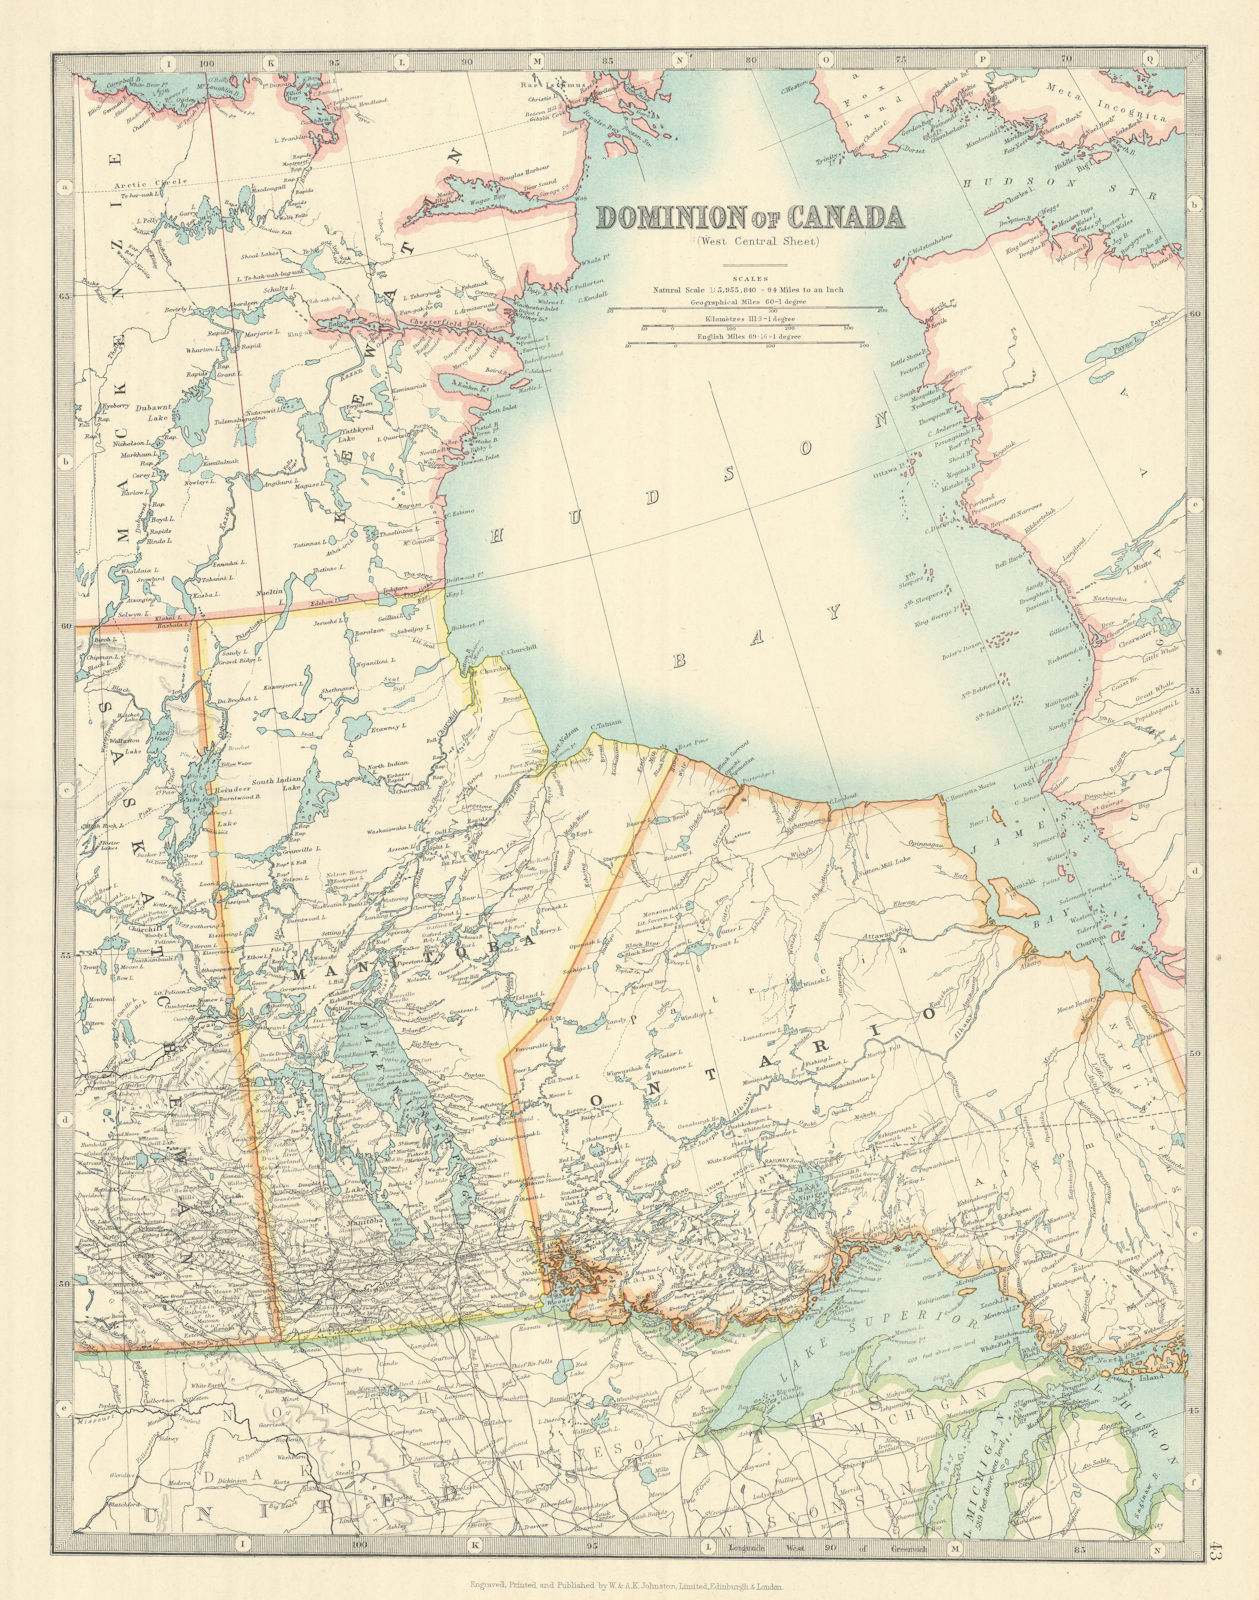 Associate Product HUDSON BAY & CENTRAL CANADA. Manitoba. Northern Ontario. JOHNSTON 1913 old map